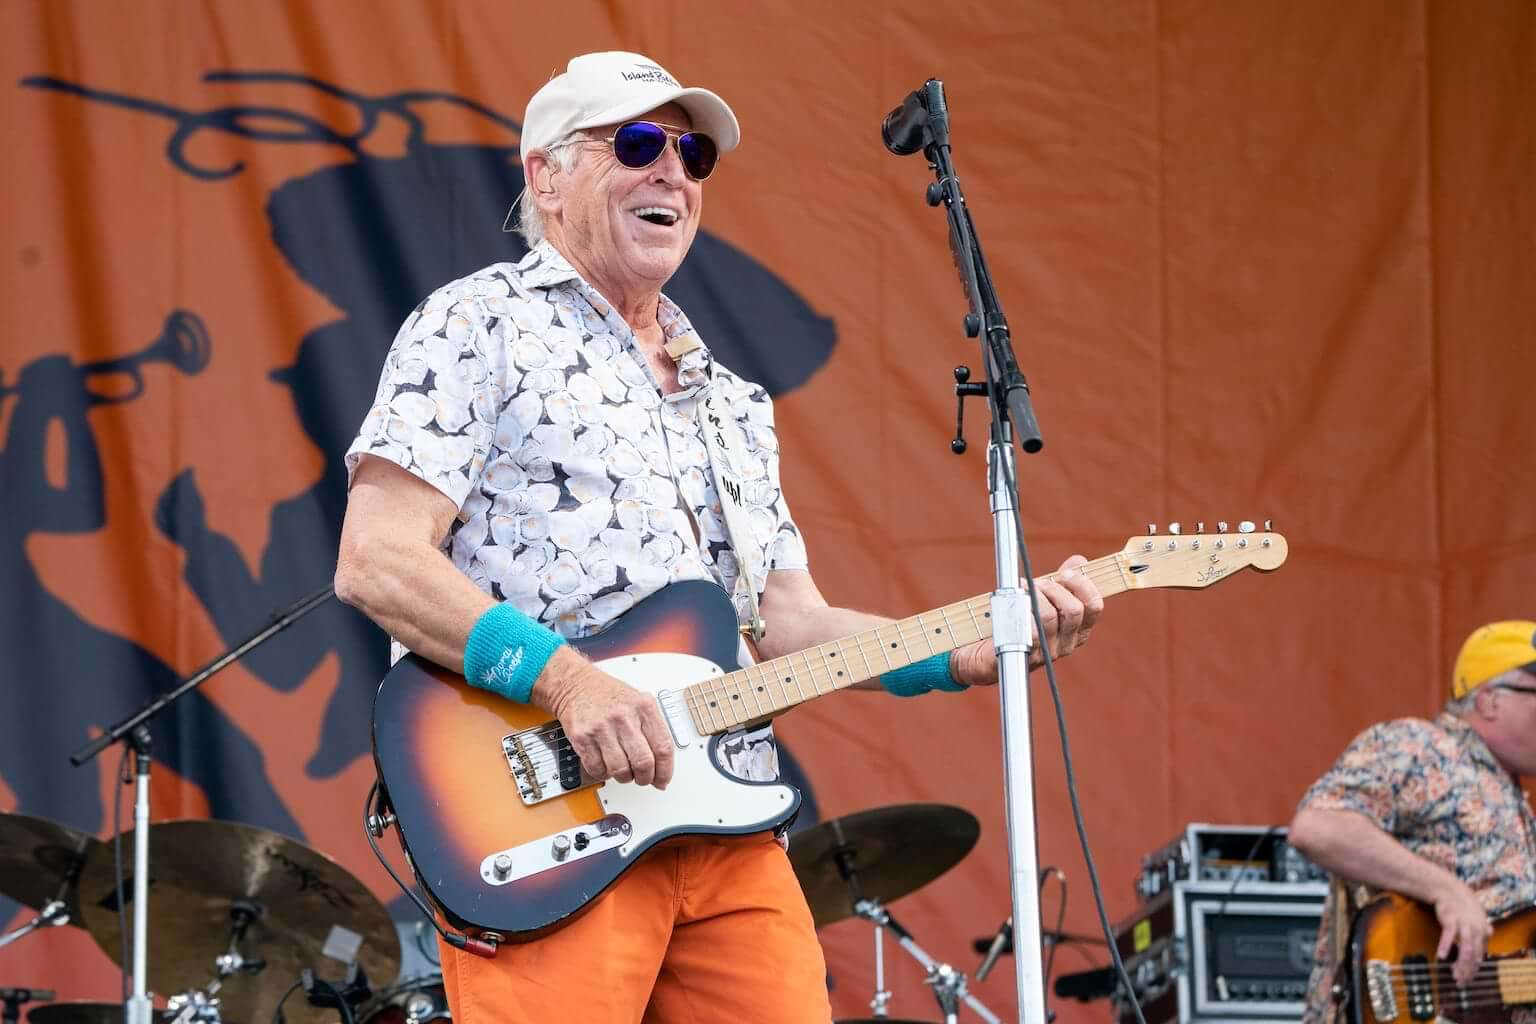 Jimmy Buffett performs at the New Orleans Jazz and Heritage Festival, on Sunday, May 8, 2022, in New Orleans. (Photo by Amy Harris/Invision/AP). Jimmy Buffett's cause of death was revealed to be Merkel cell skin cancer.